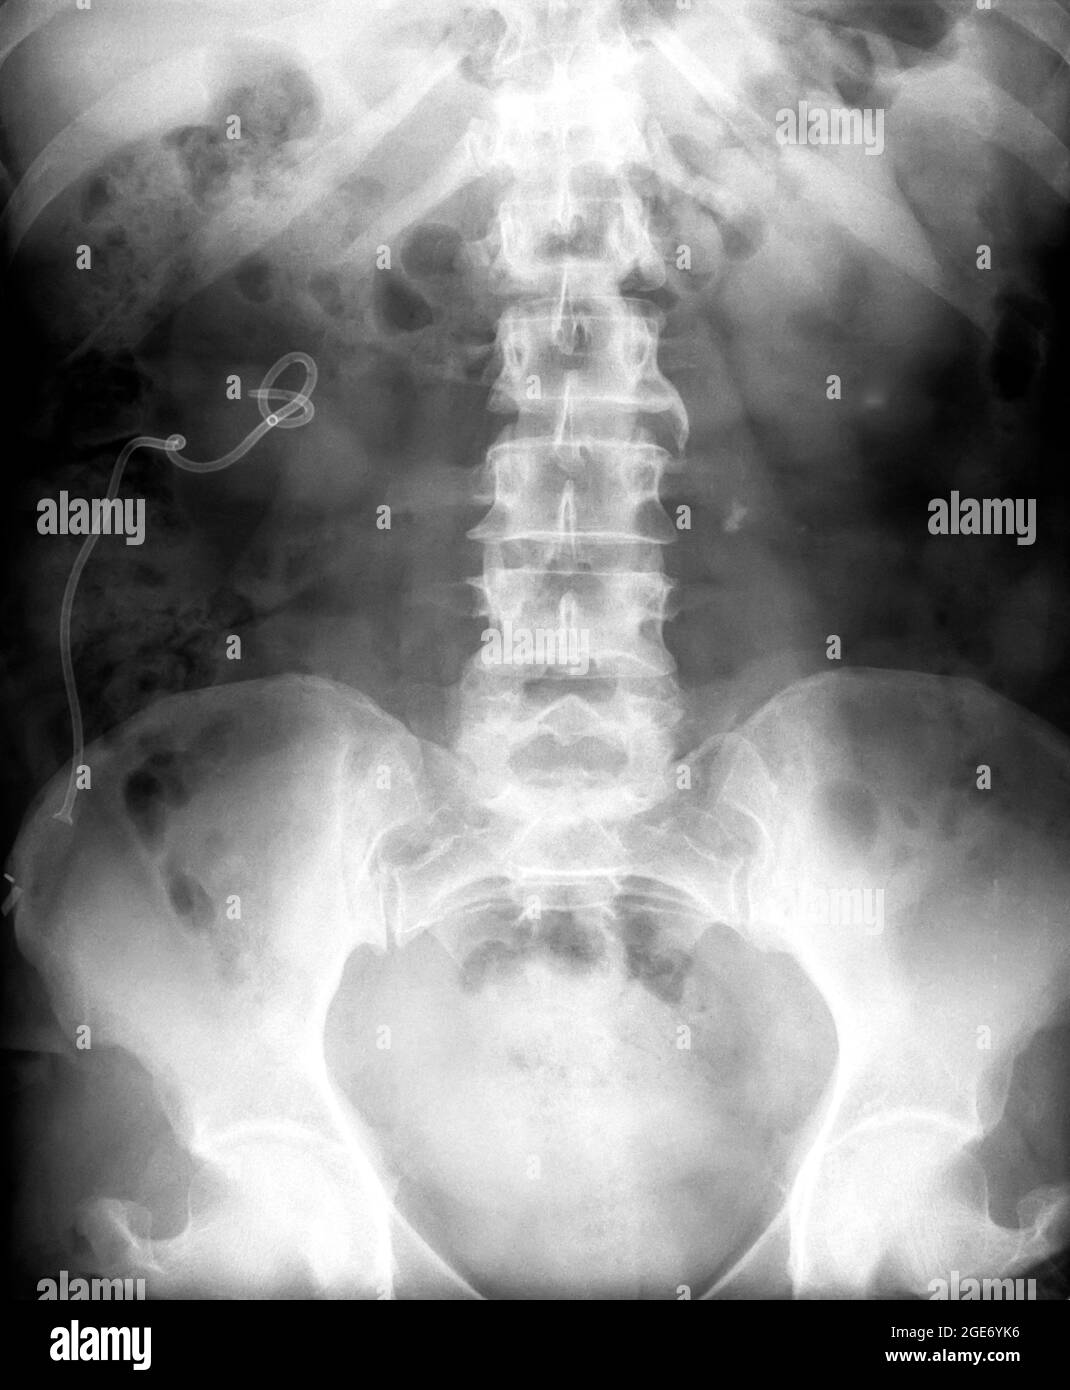 X-ray of an abdominal of a 50 year old female patient Stock Photo